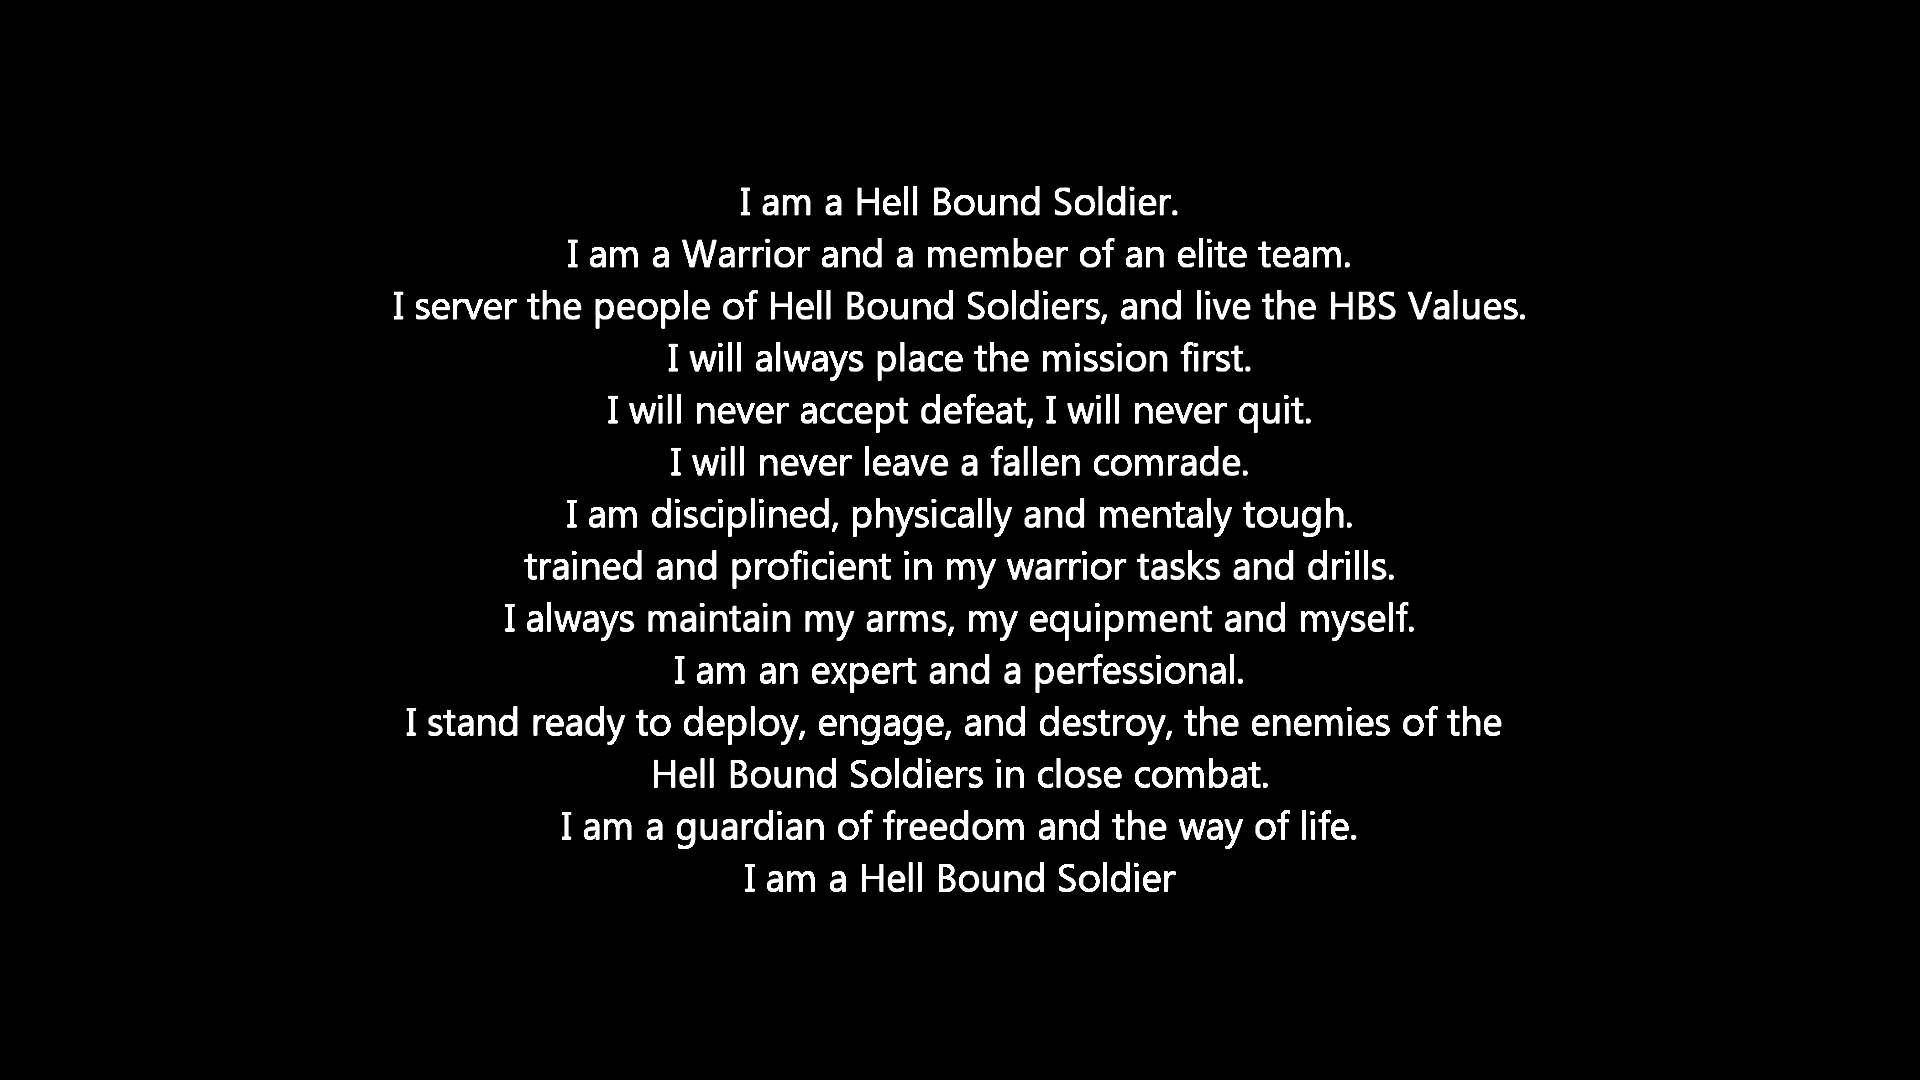 Hell Bound Soldiers Creed